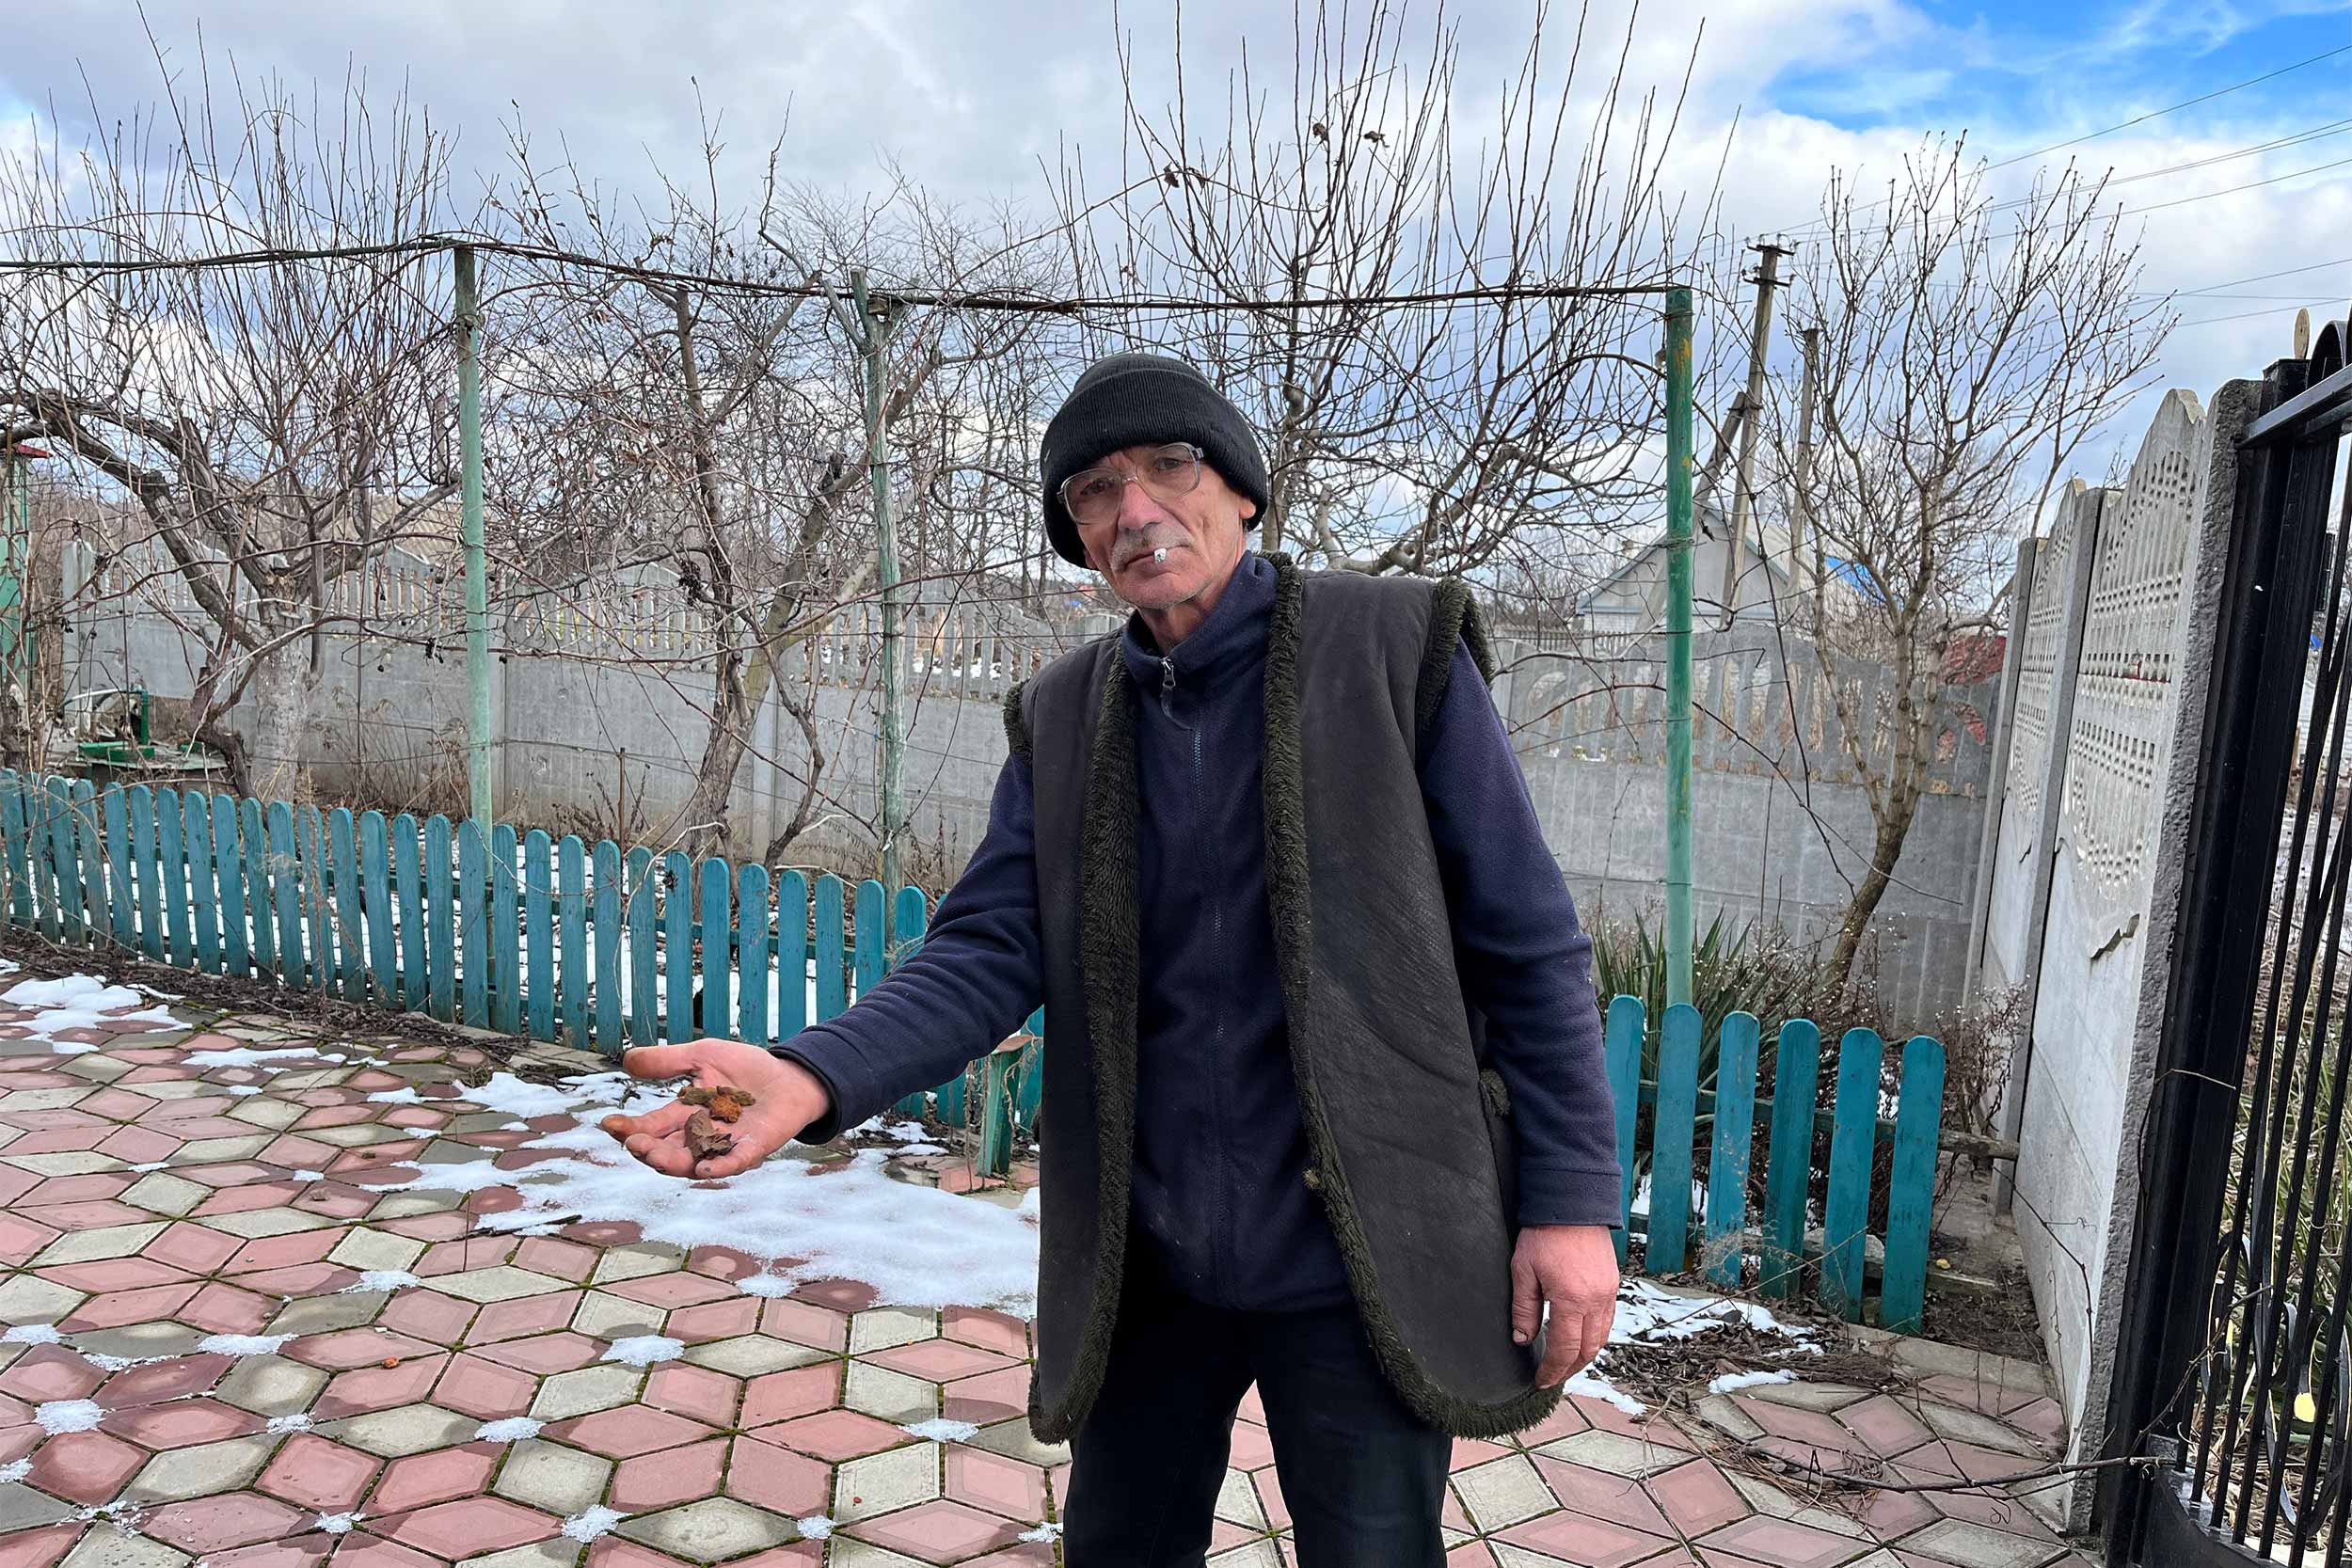 Oleksandr Lanchyk, on of the few who remaining residents in Orikhiv shows off fragments of the shell that hit his house in October, setting the house on fire. © IWPR